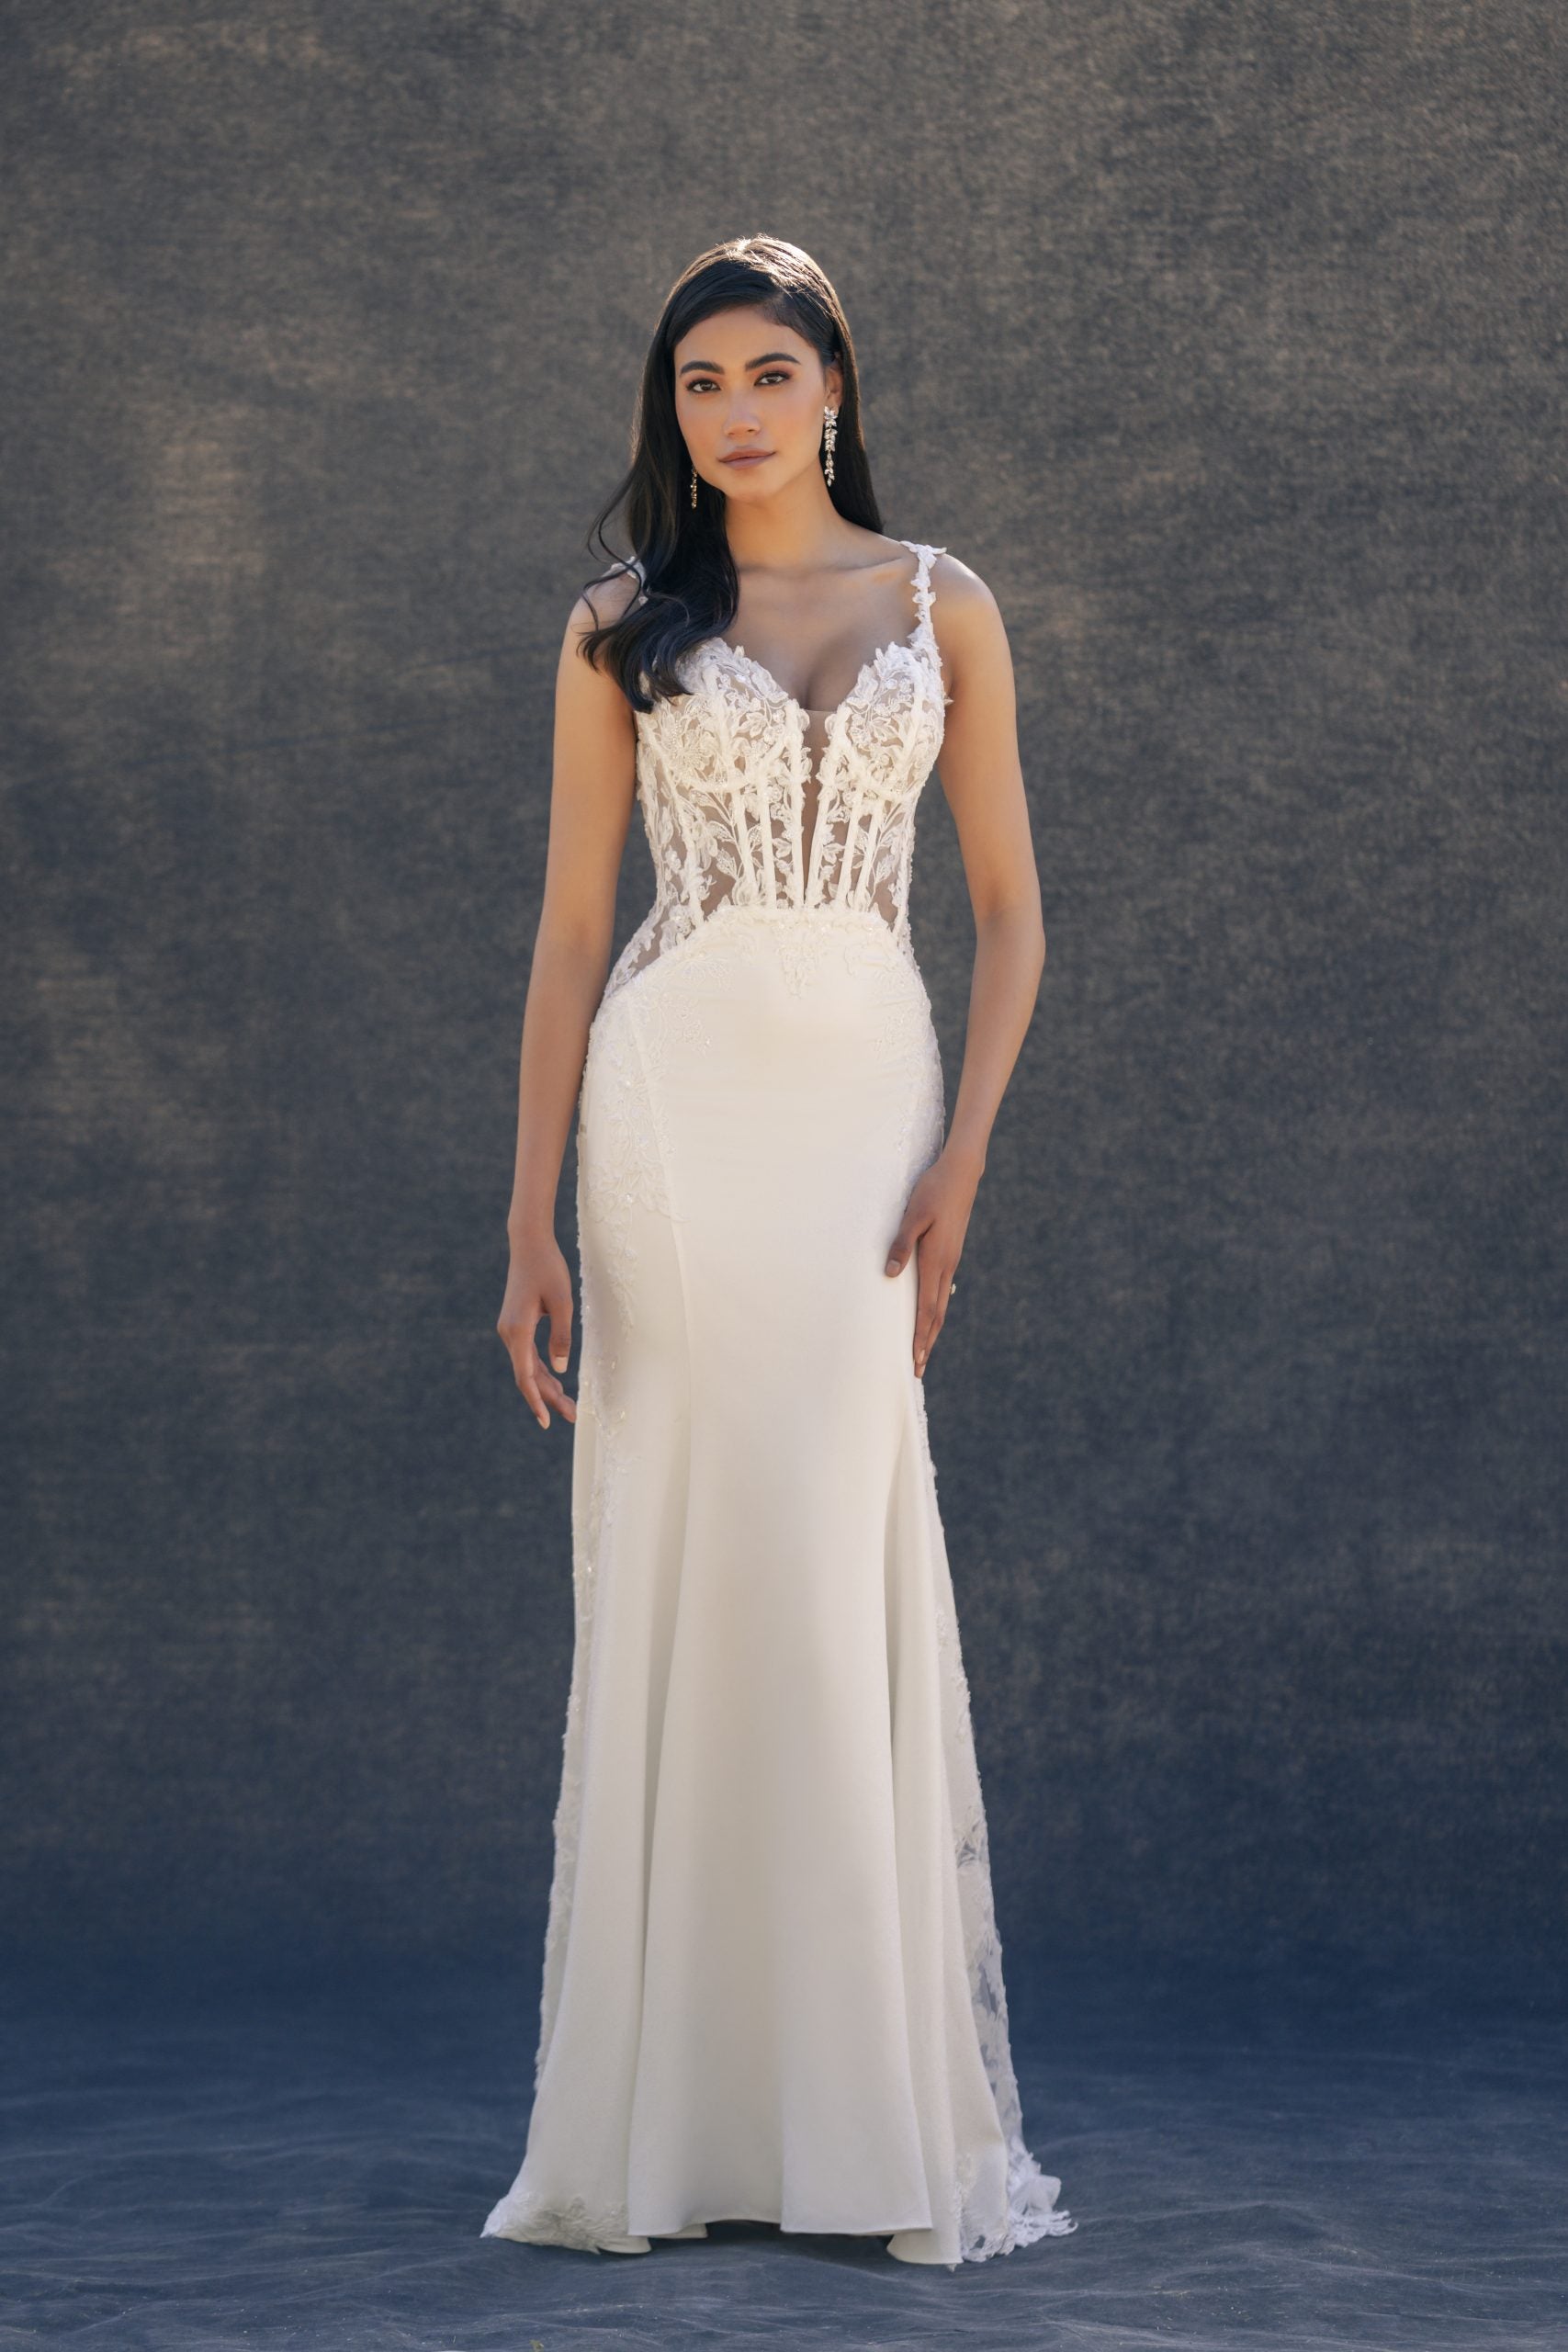 Lace And Crepe Sheath Gown With Open Back by Allure Bridals - Image 1